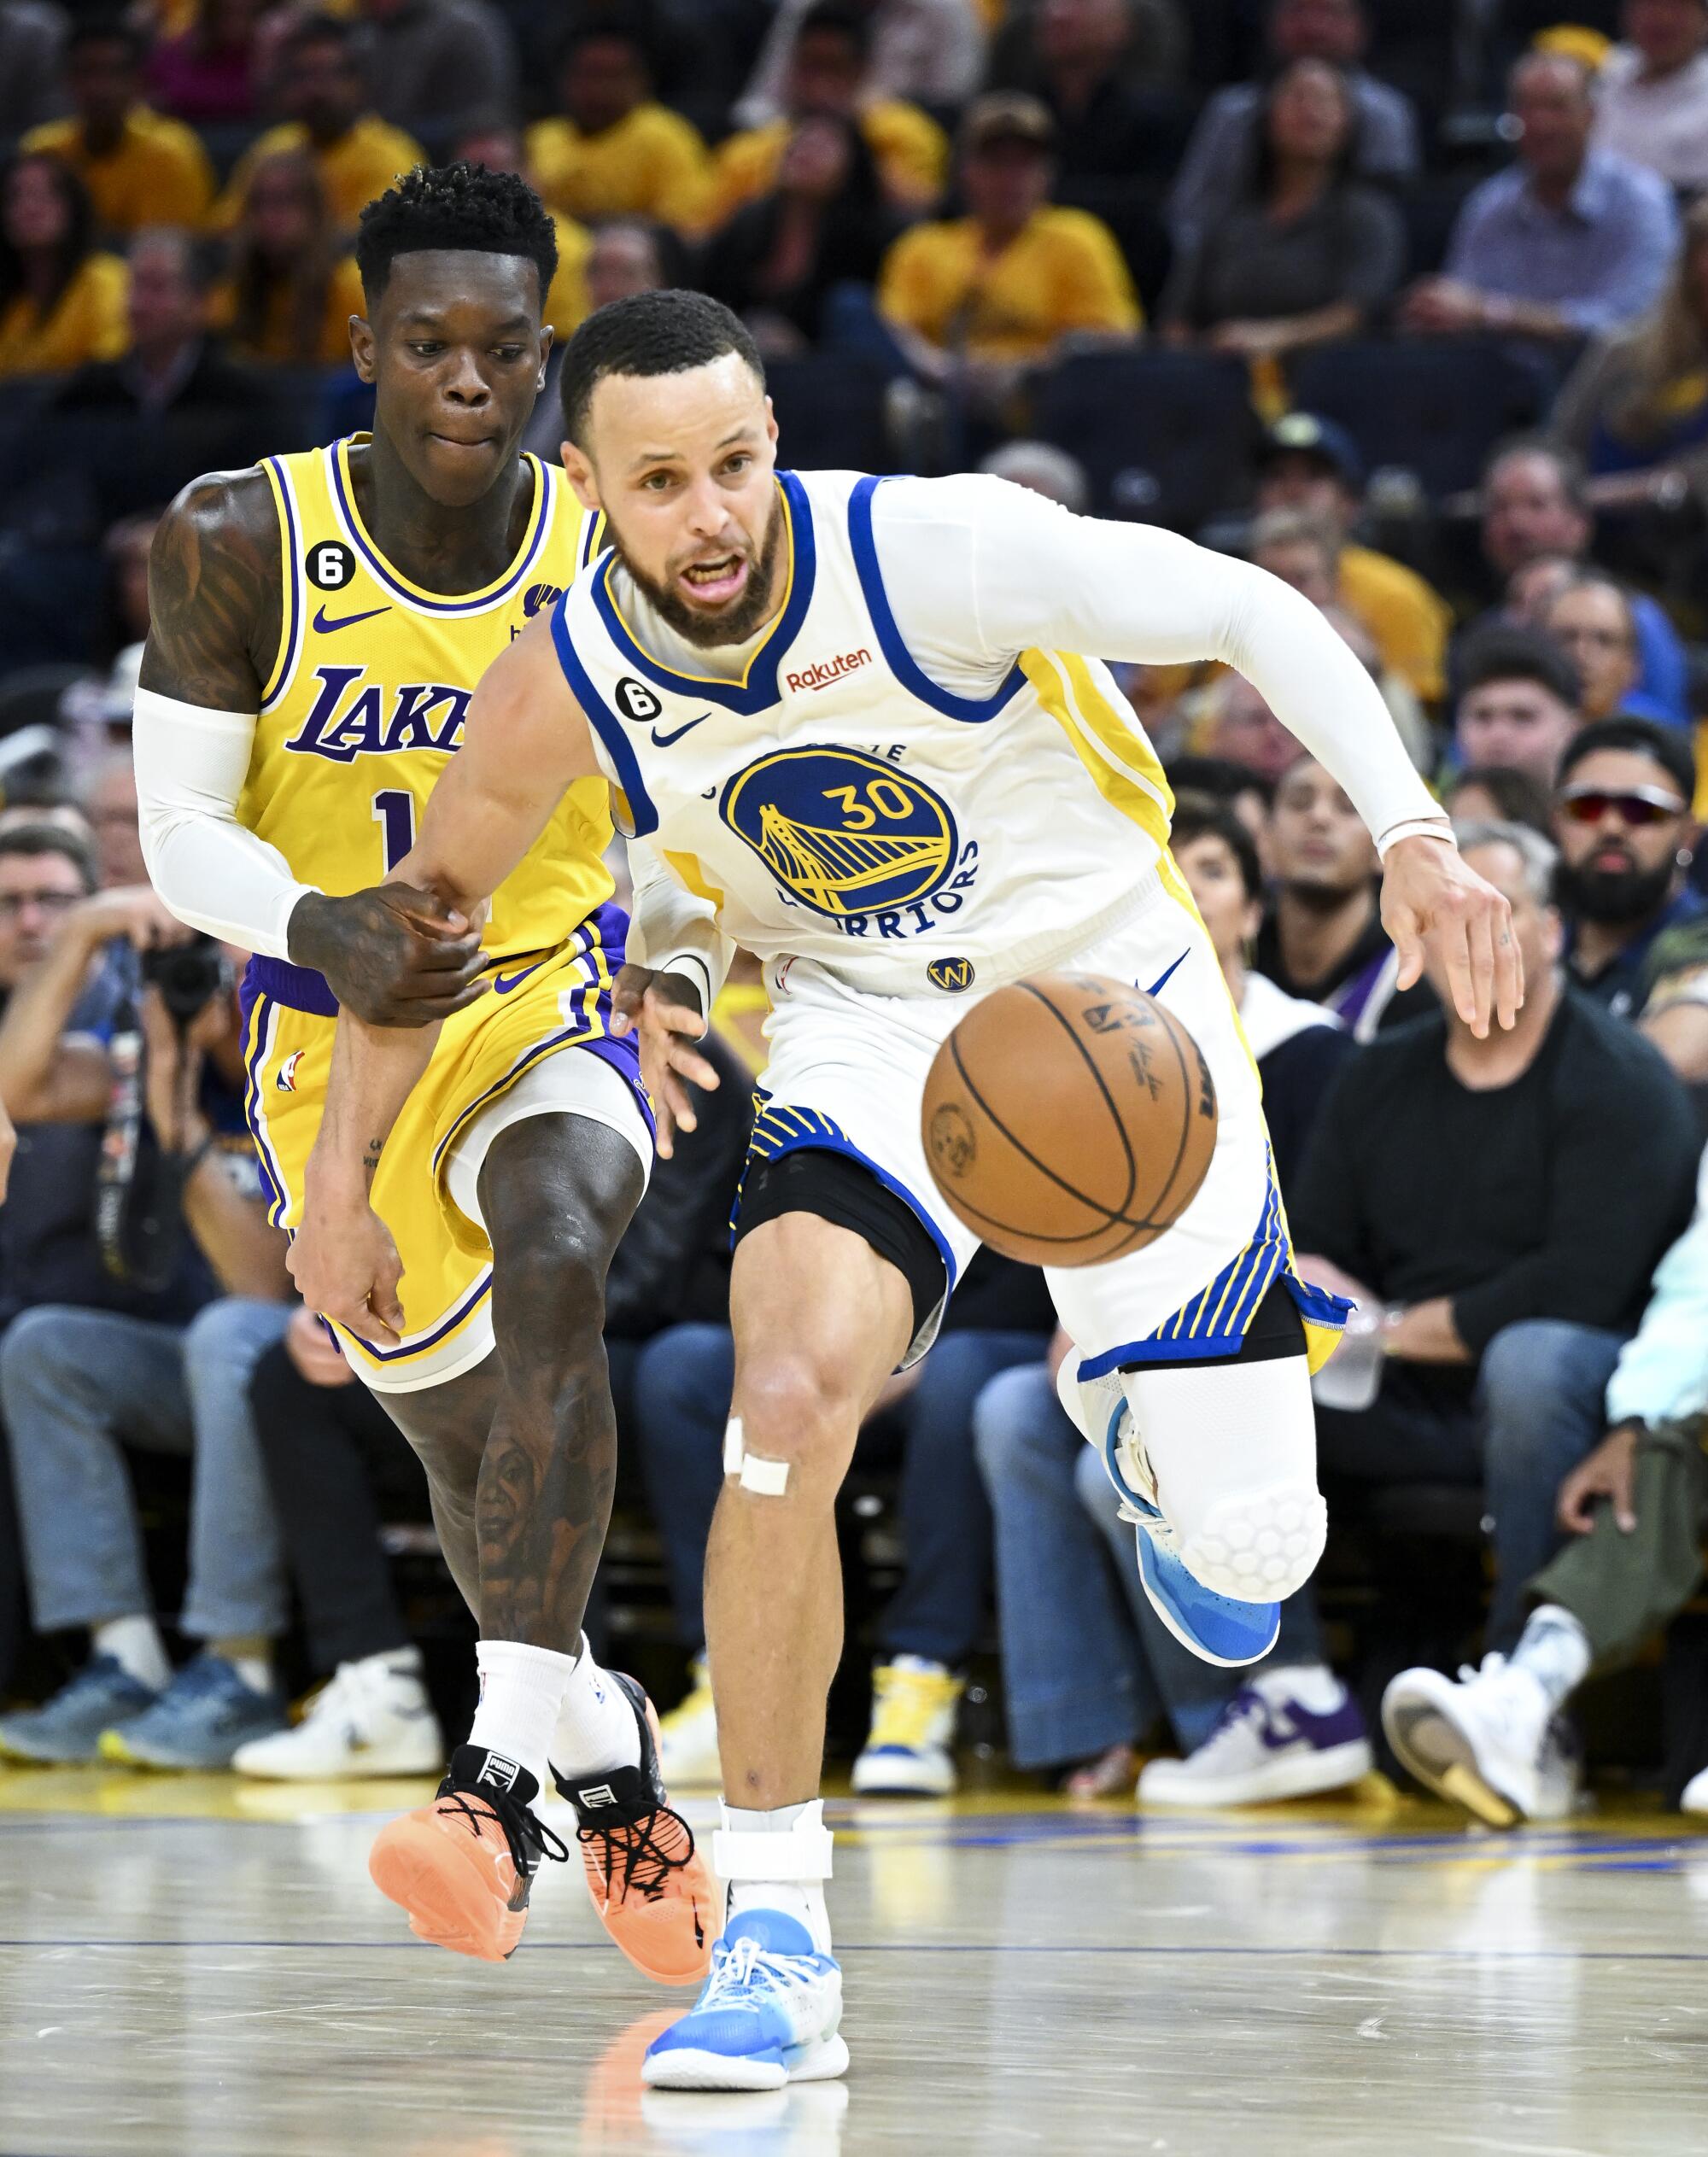 Lakers guard Dennis Schroder grabs the arm of Warriors guard Stephen Curry while chasing a loose ball.